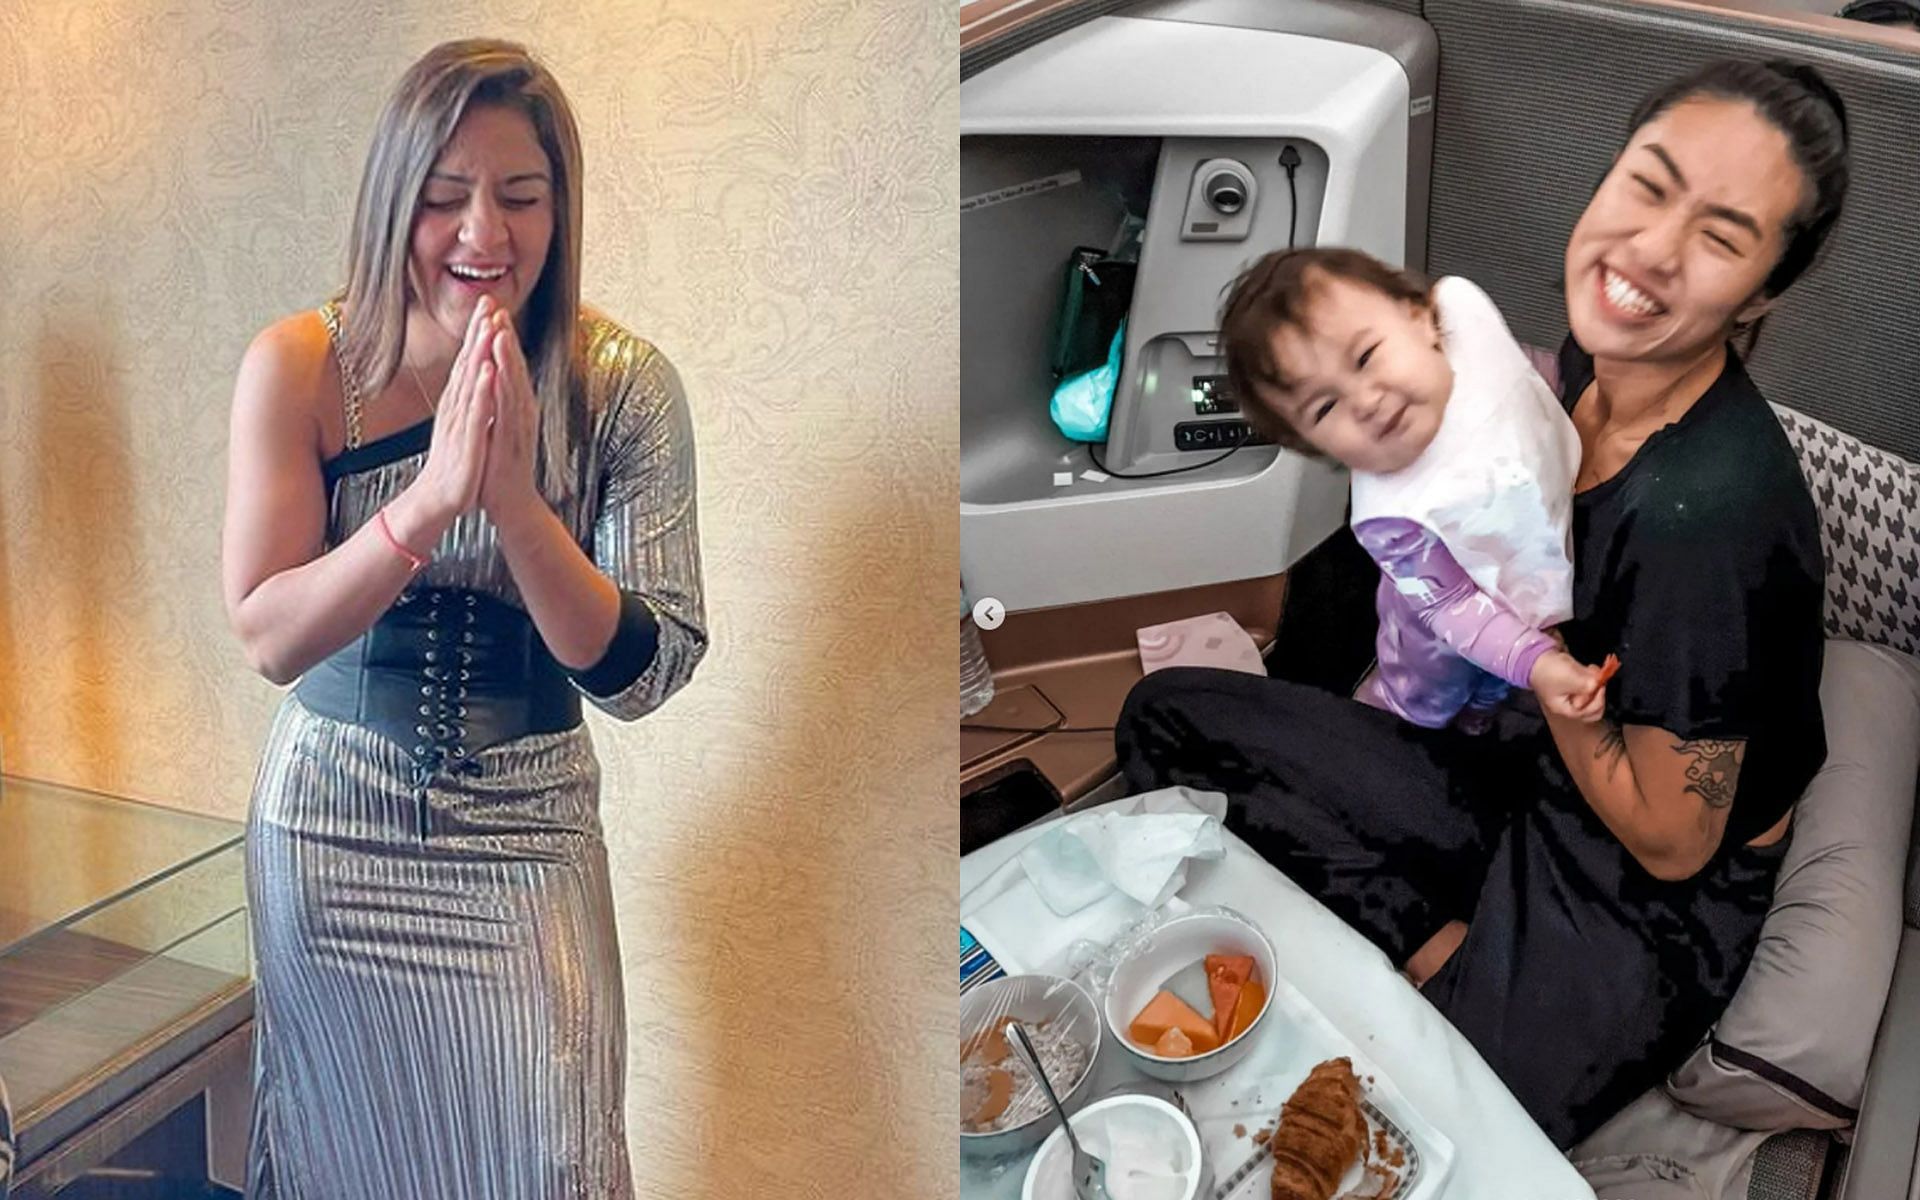 Ritu Phogat (L) joined fans in giving Angela Lee (R) a warm welcome through comments on Instagram. | [Photos: @rituphogat48 and @angelaleemma on Instagram]